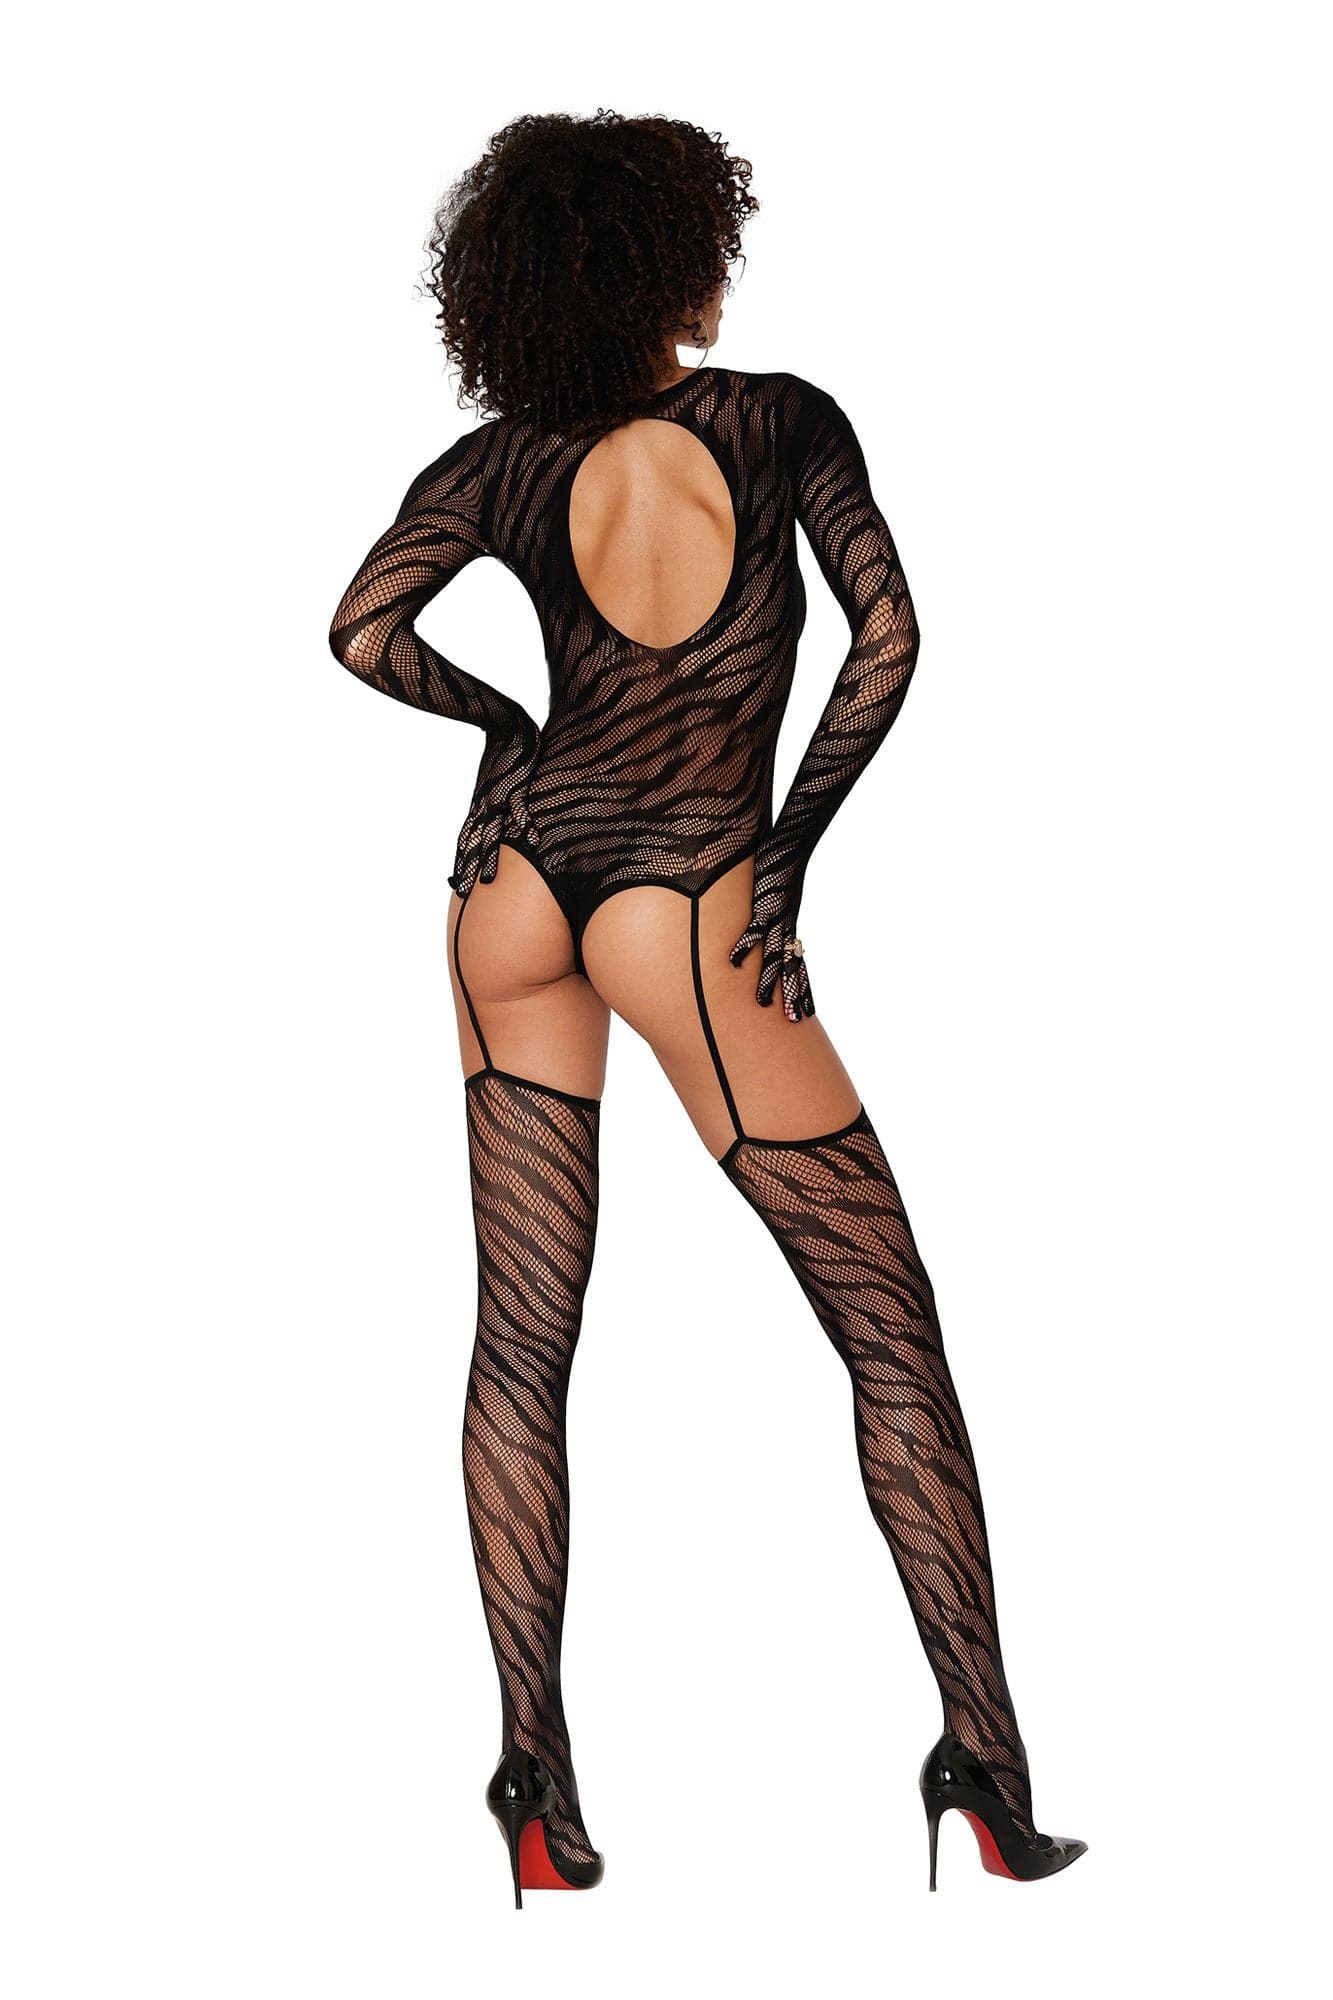 dance body stocking, bodystockings for dancers